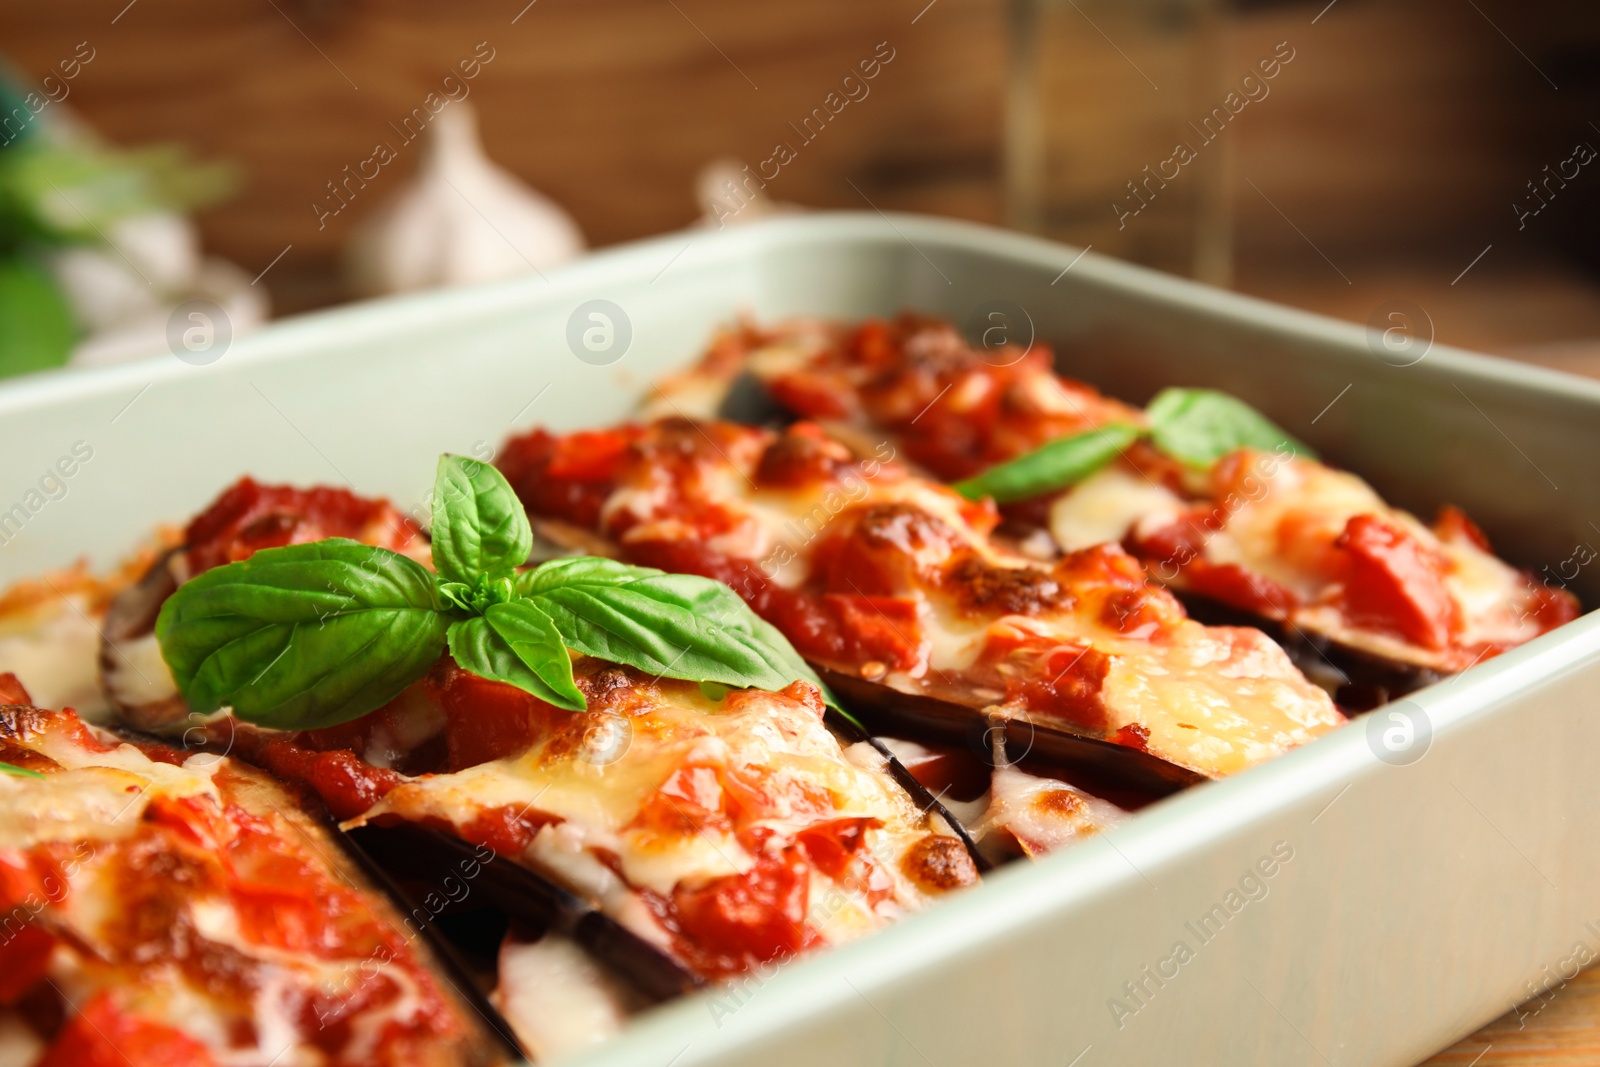 Photo of Baked eggplant with tomatoes, cheese and basil in dishware, closeup